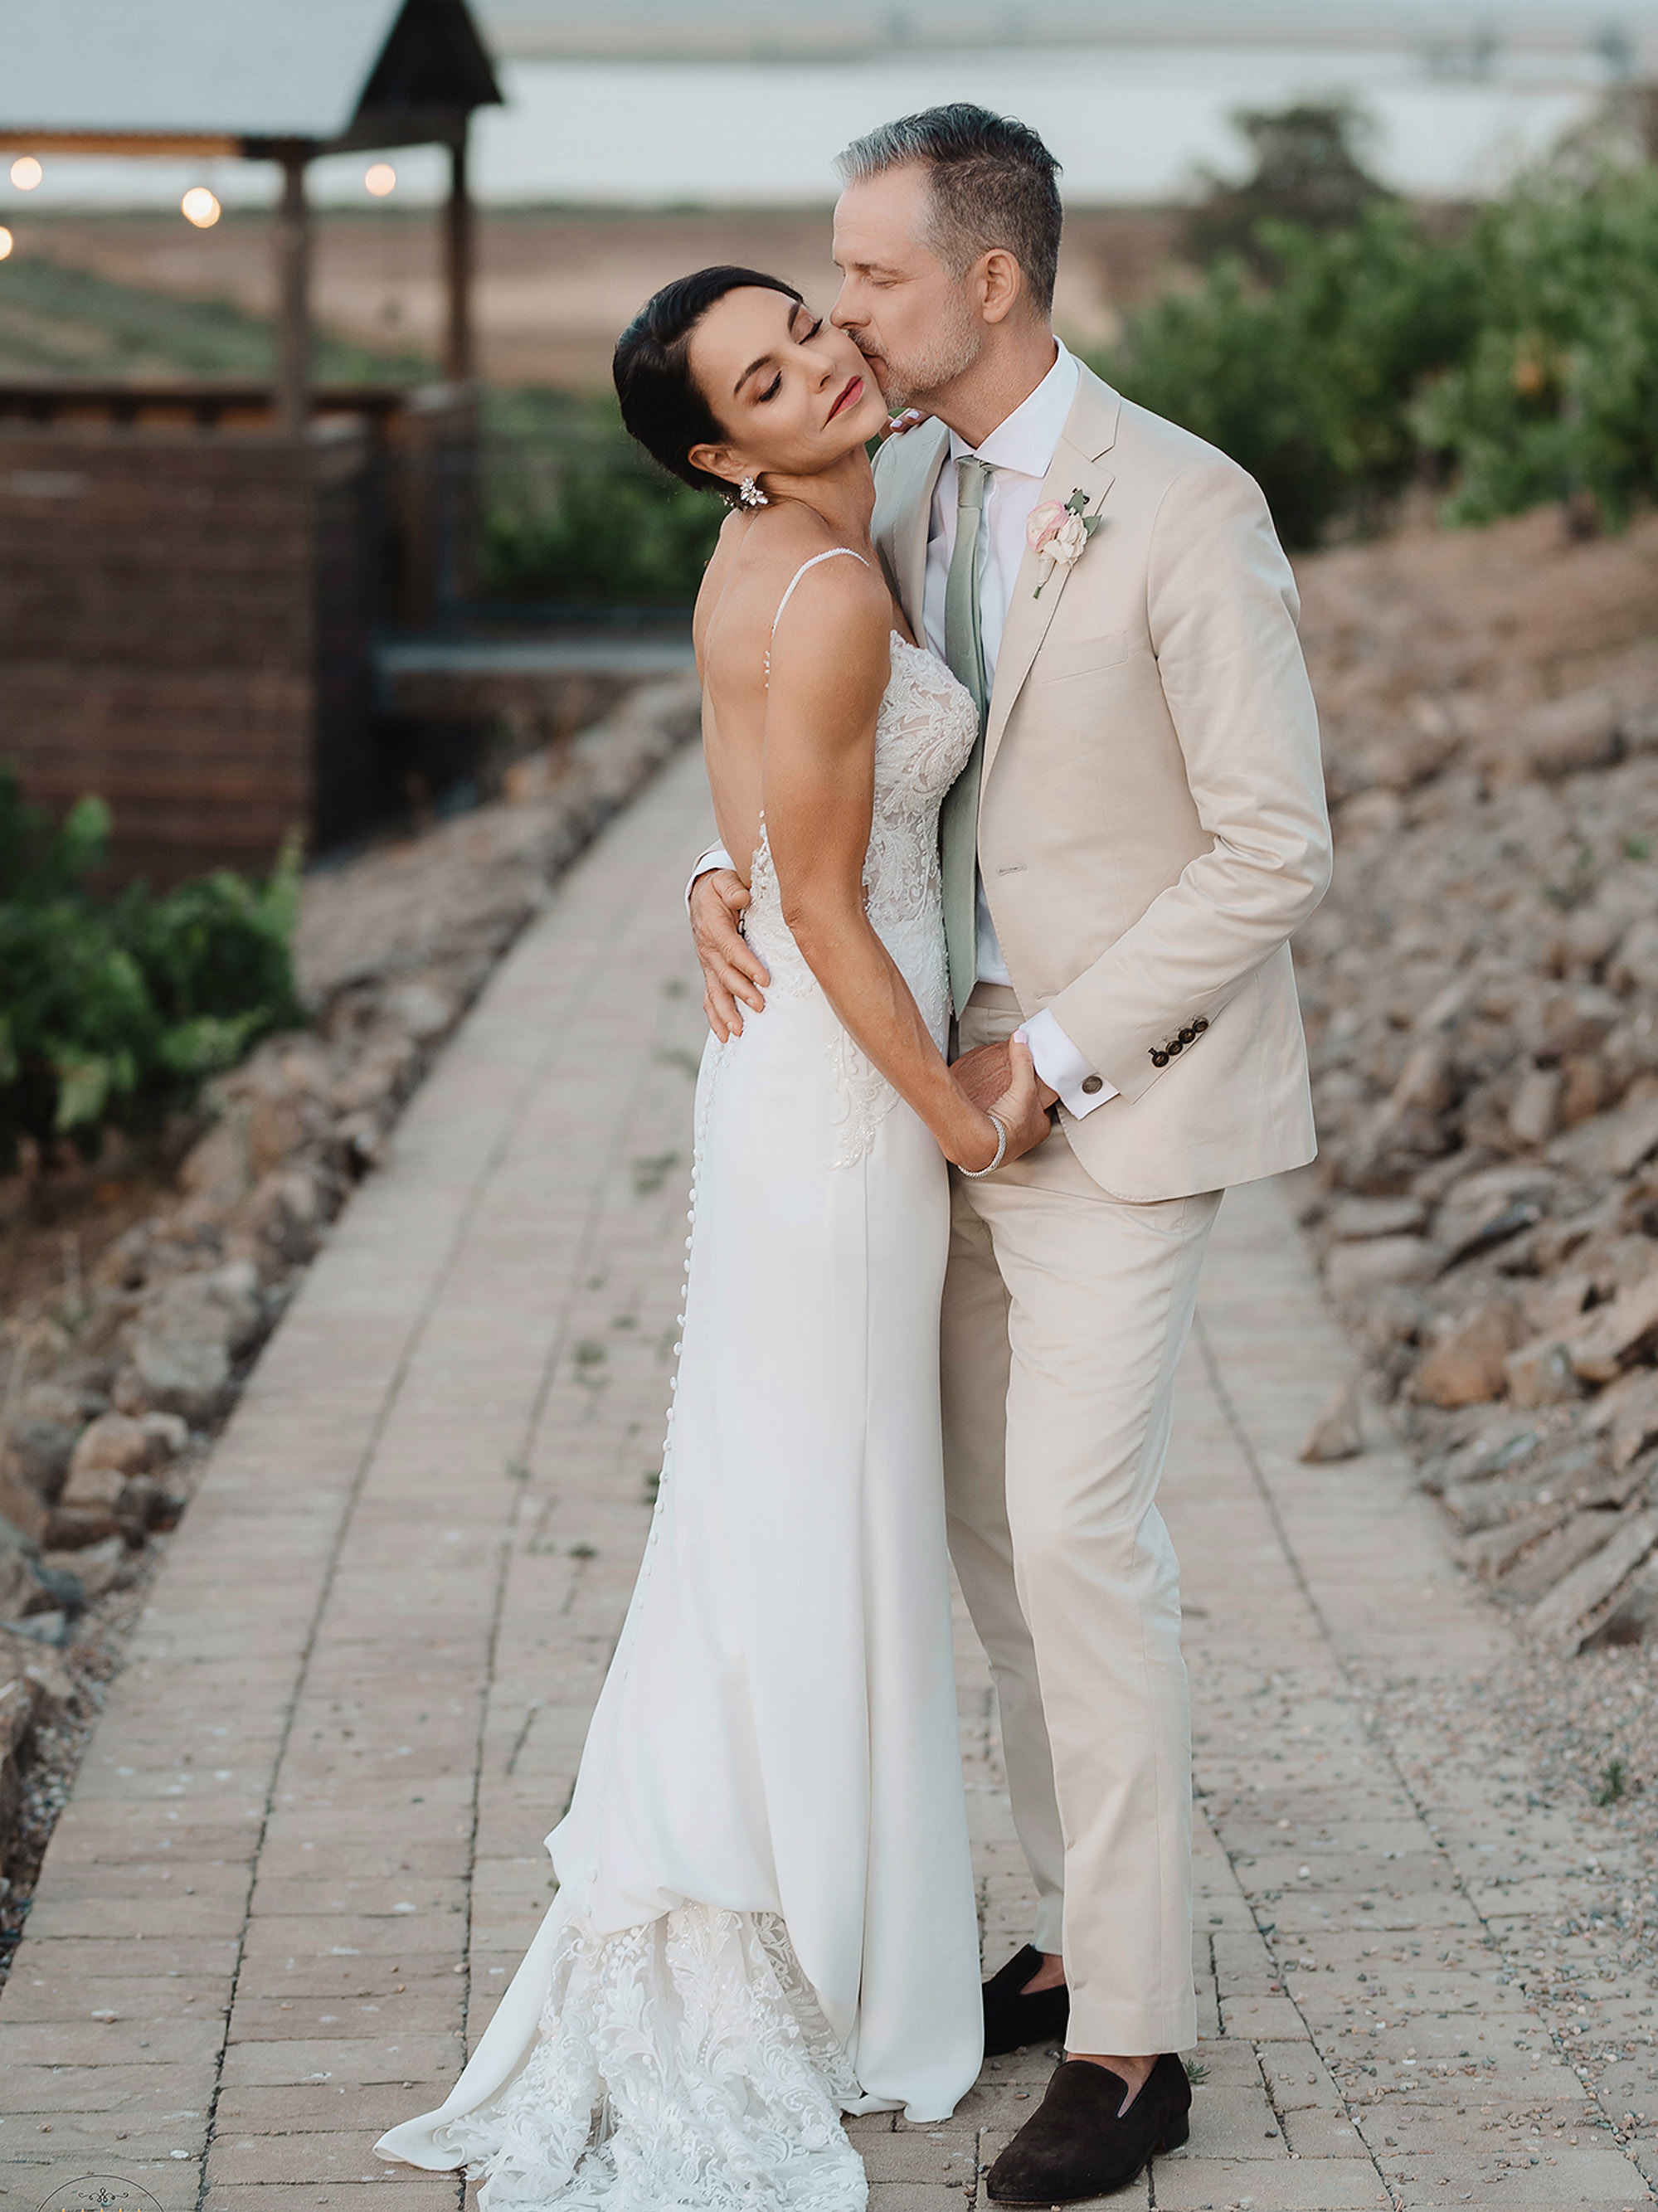 A bride and groom kissing on a pathway in front of a vineyard.